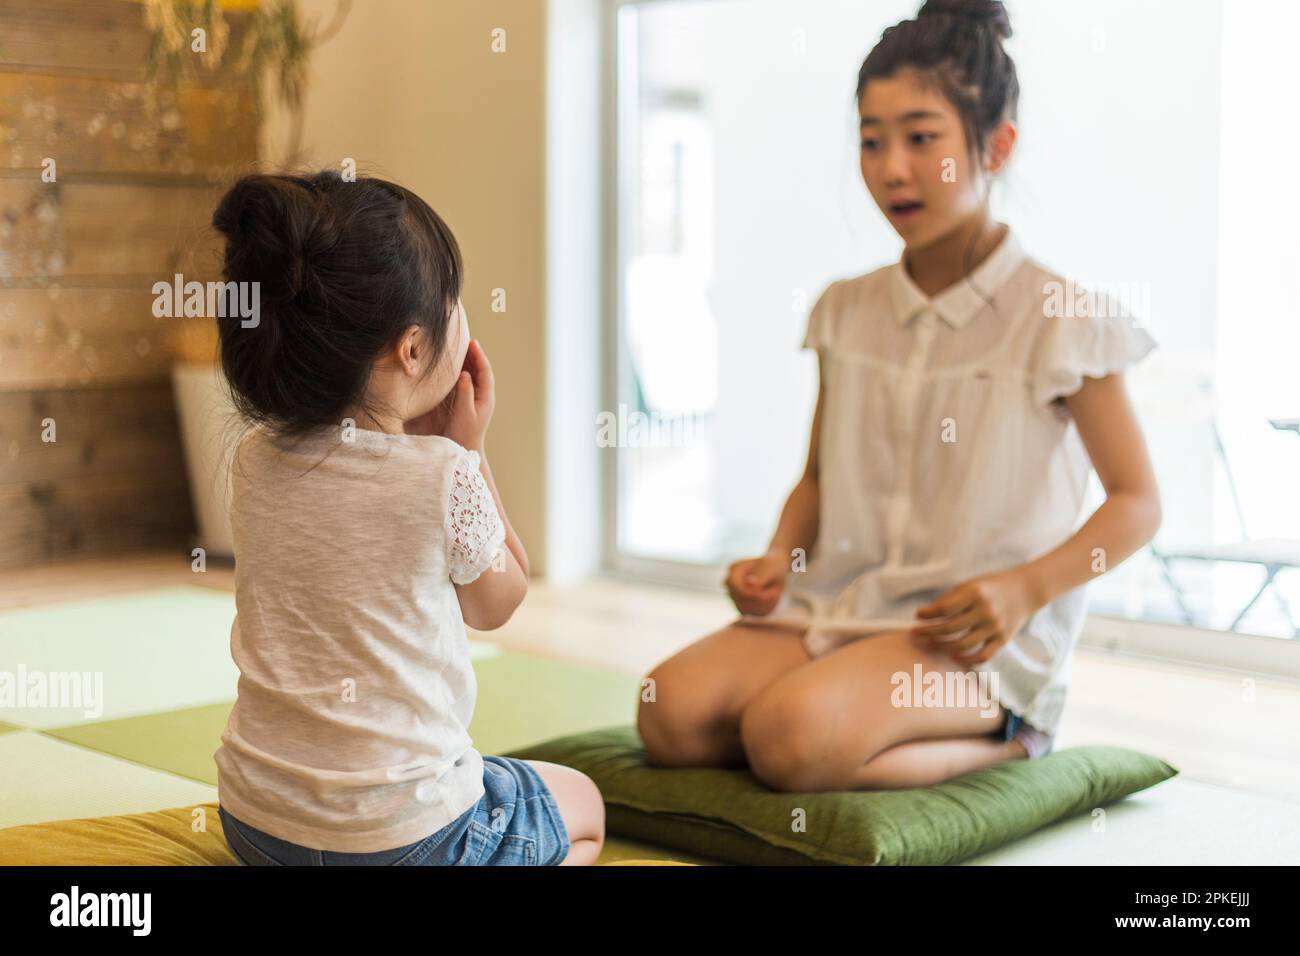 Sisters playing in the Japanese-style room Stock Photo